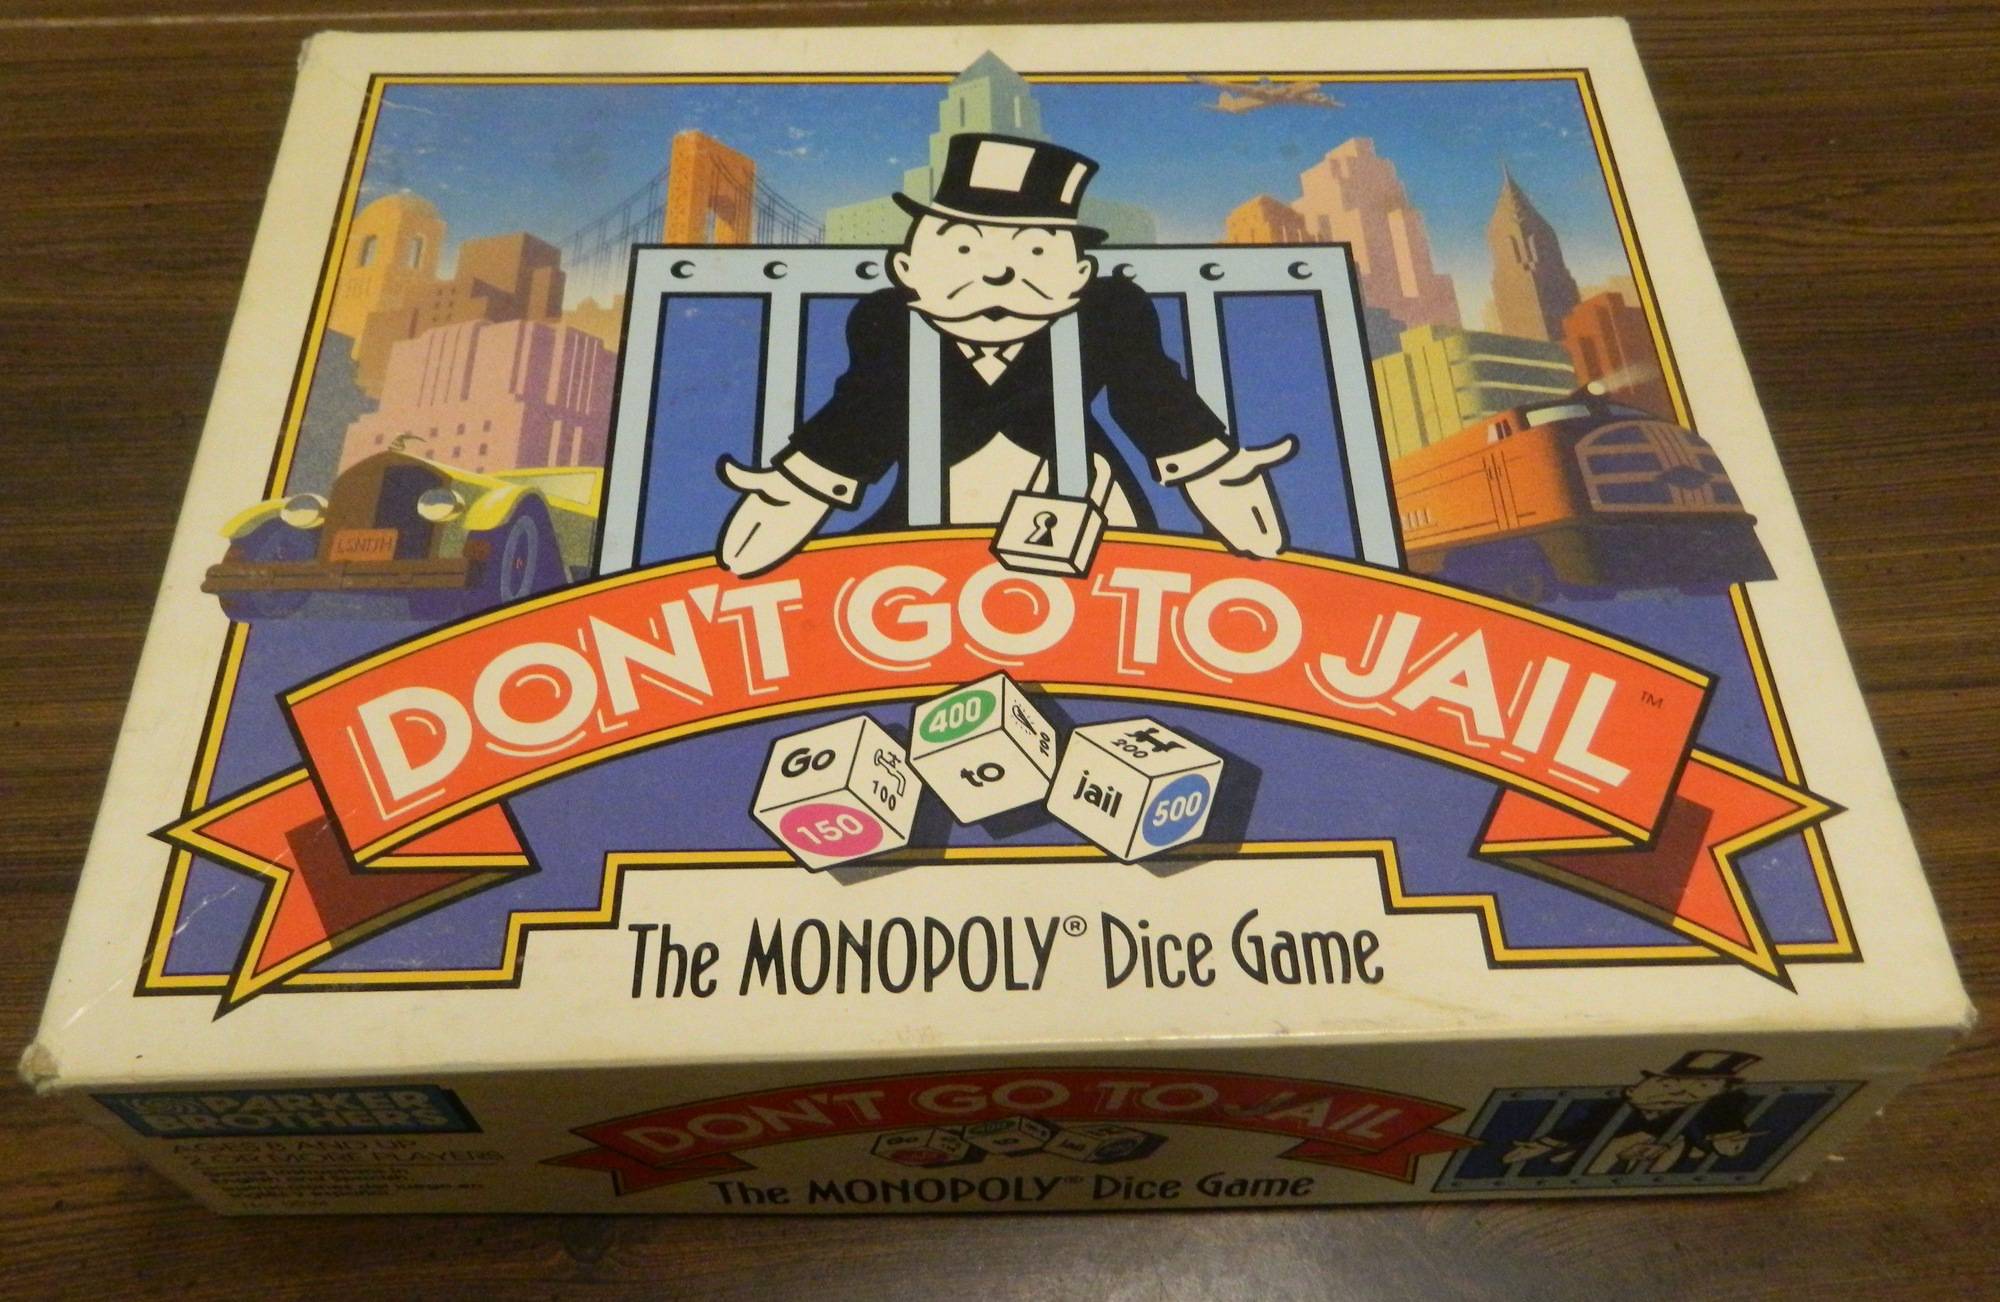 Box for Don't Go to Jail